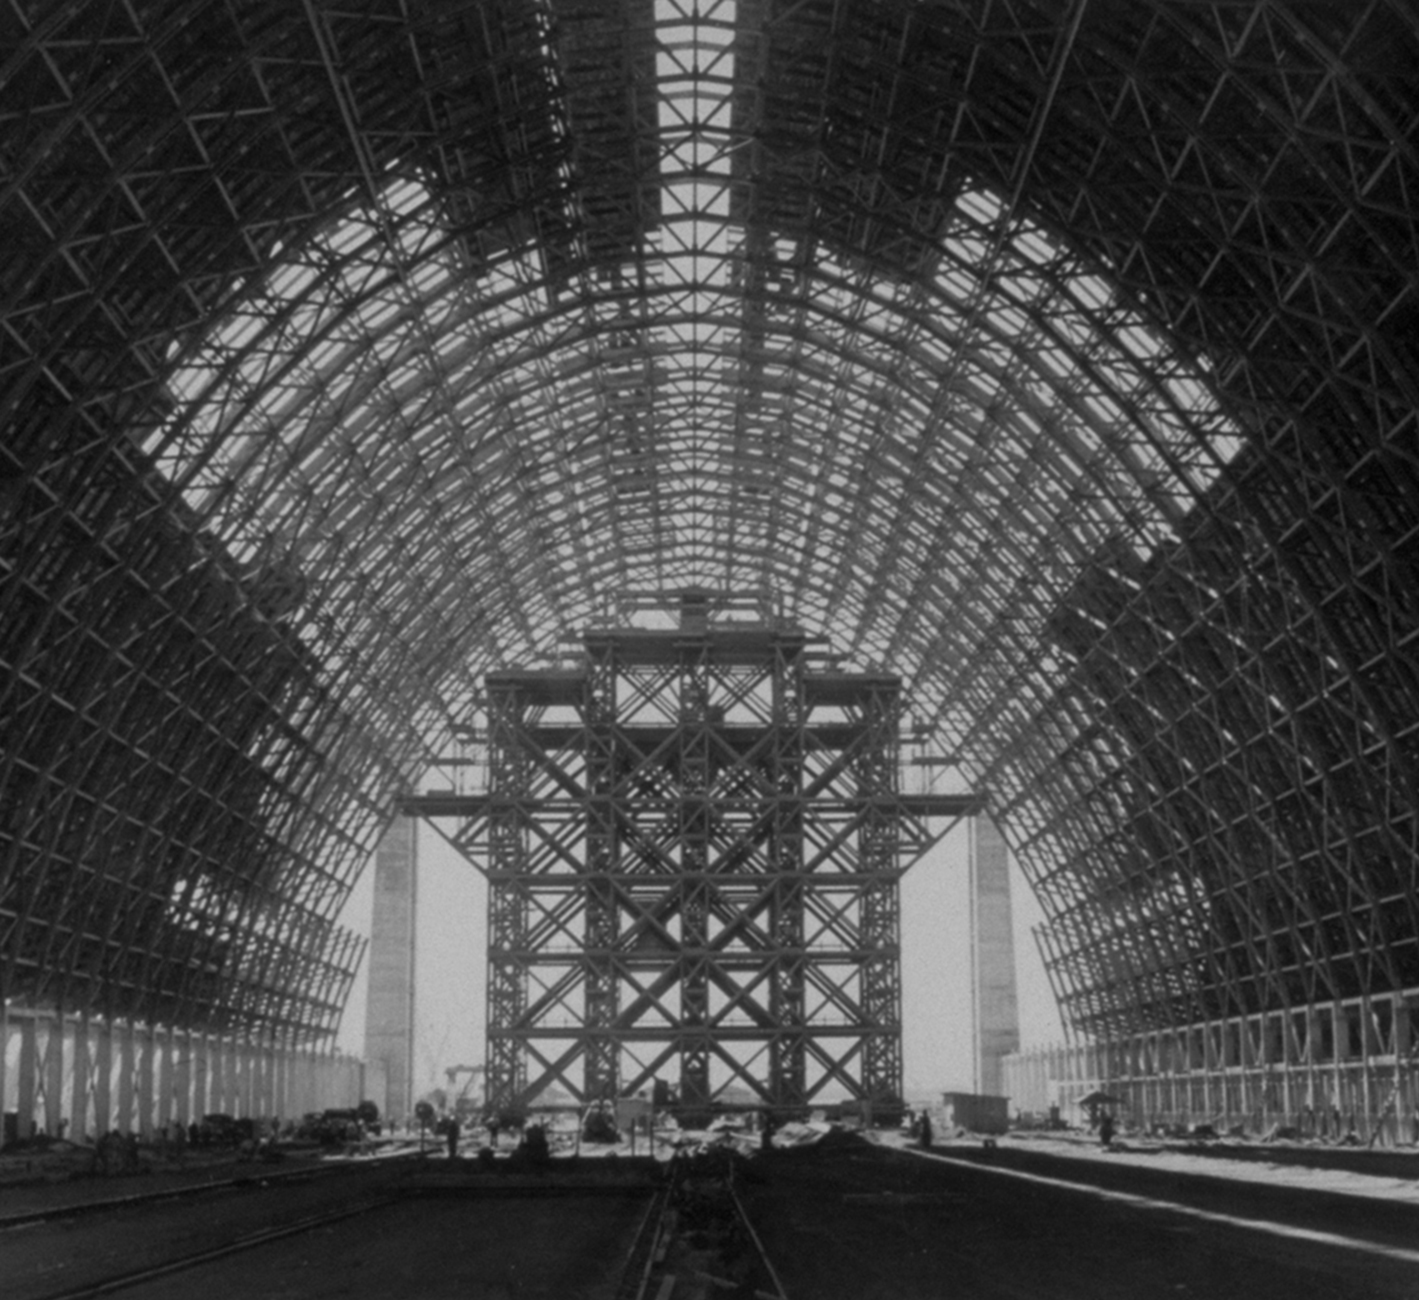 An interior view of the partially covered wood trusses of Hangar 2. A large scaffolding fills the space below the arches at the end of the building.